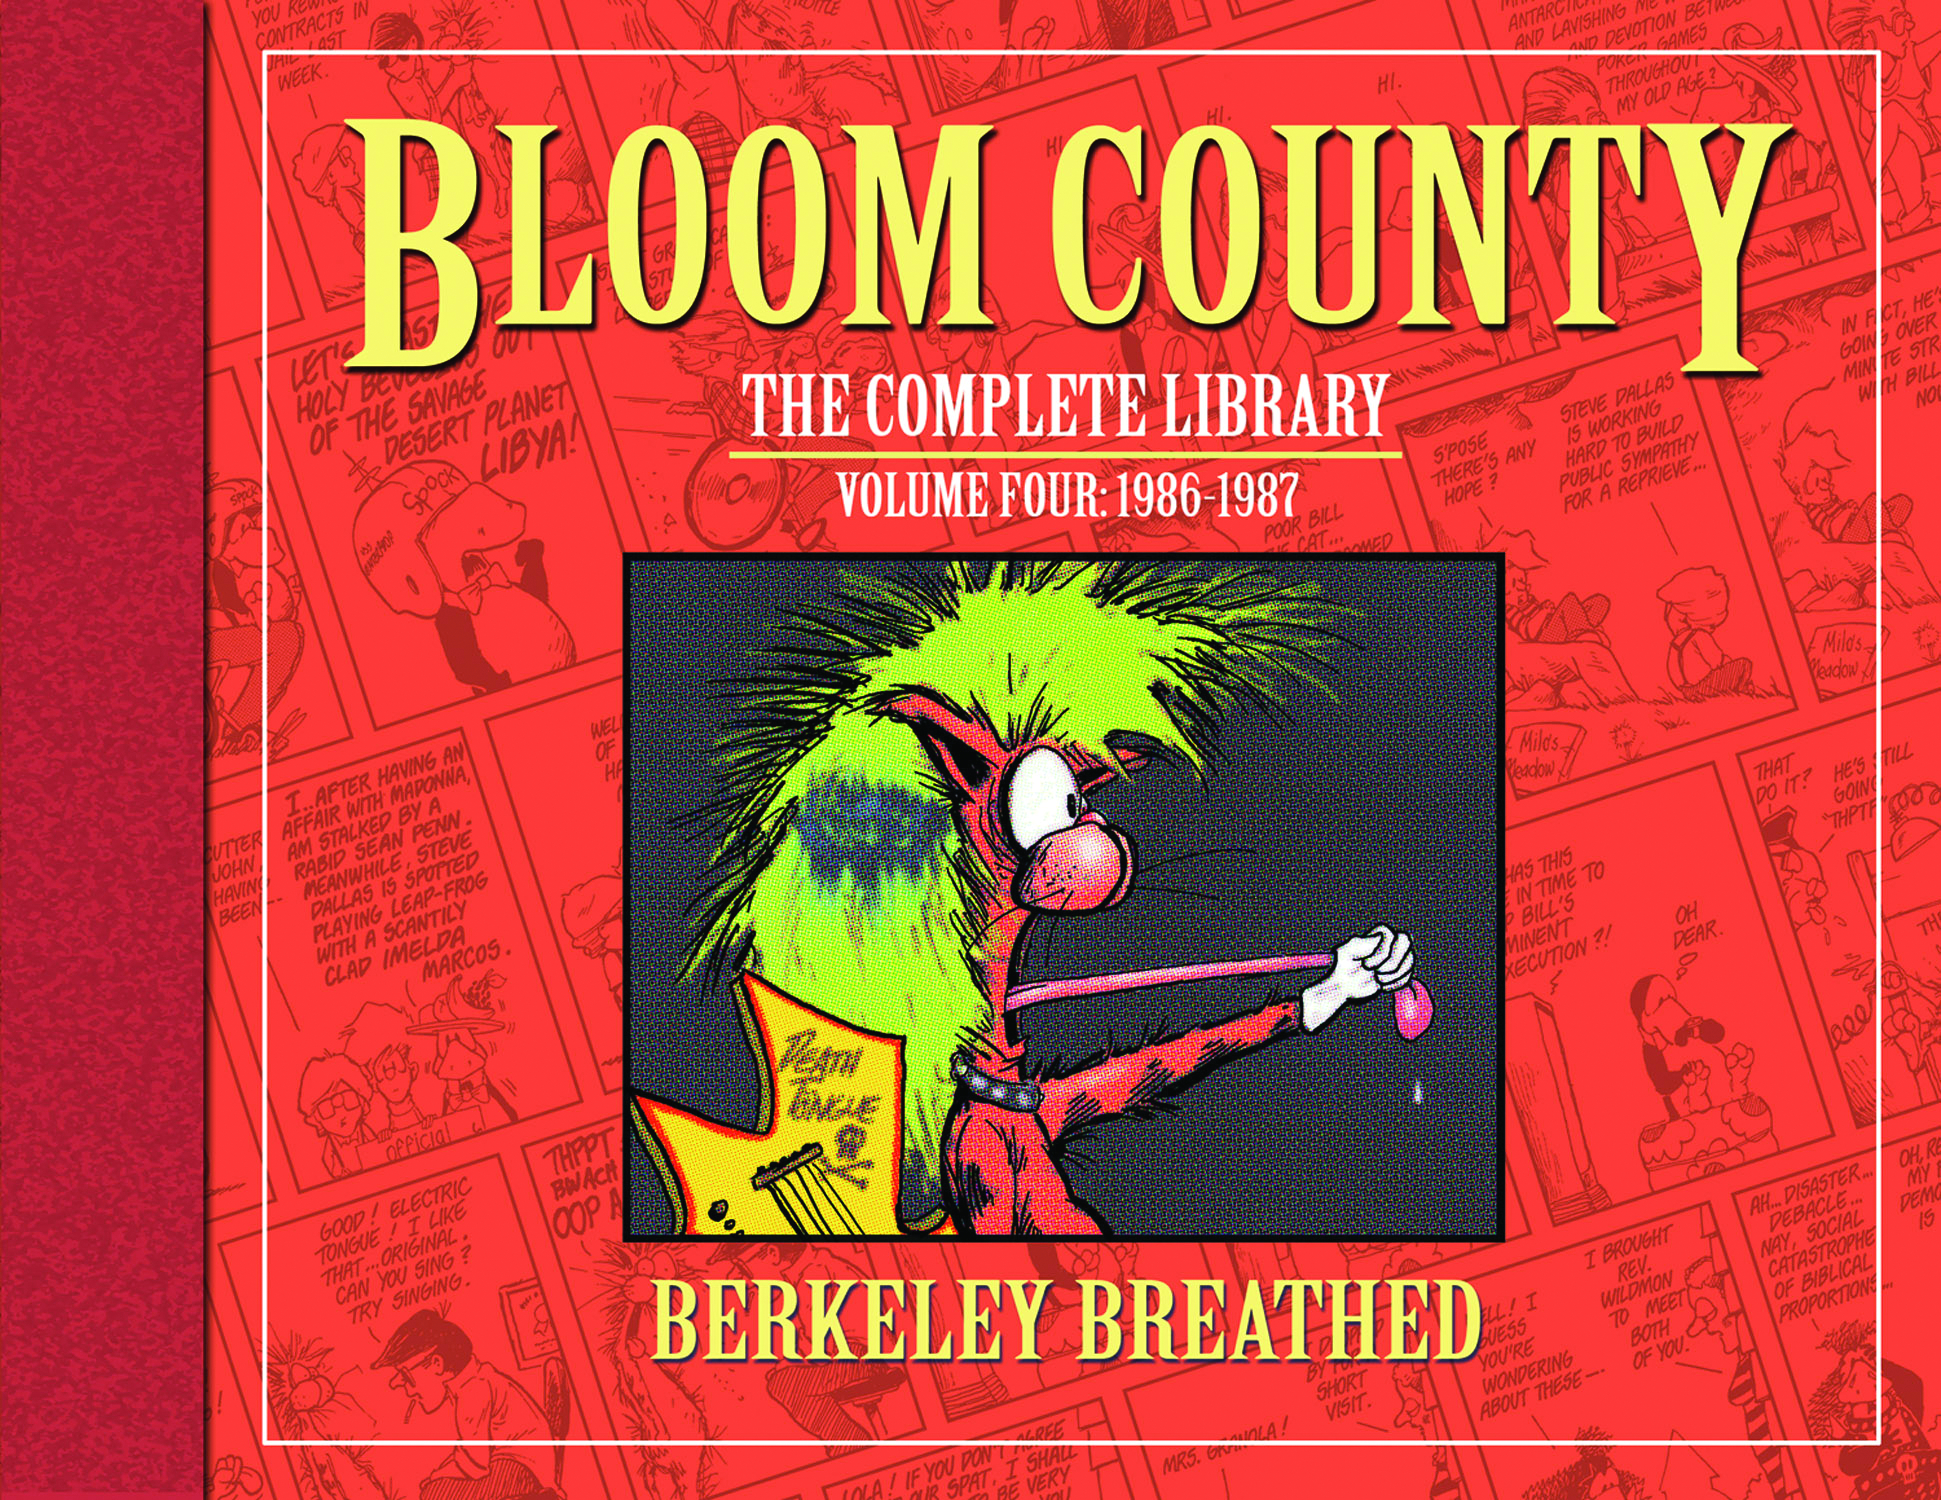 Compile library. In Bloom книга. Benjamin Bloom books. The complete solo Projects, Volume 4 фото.